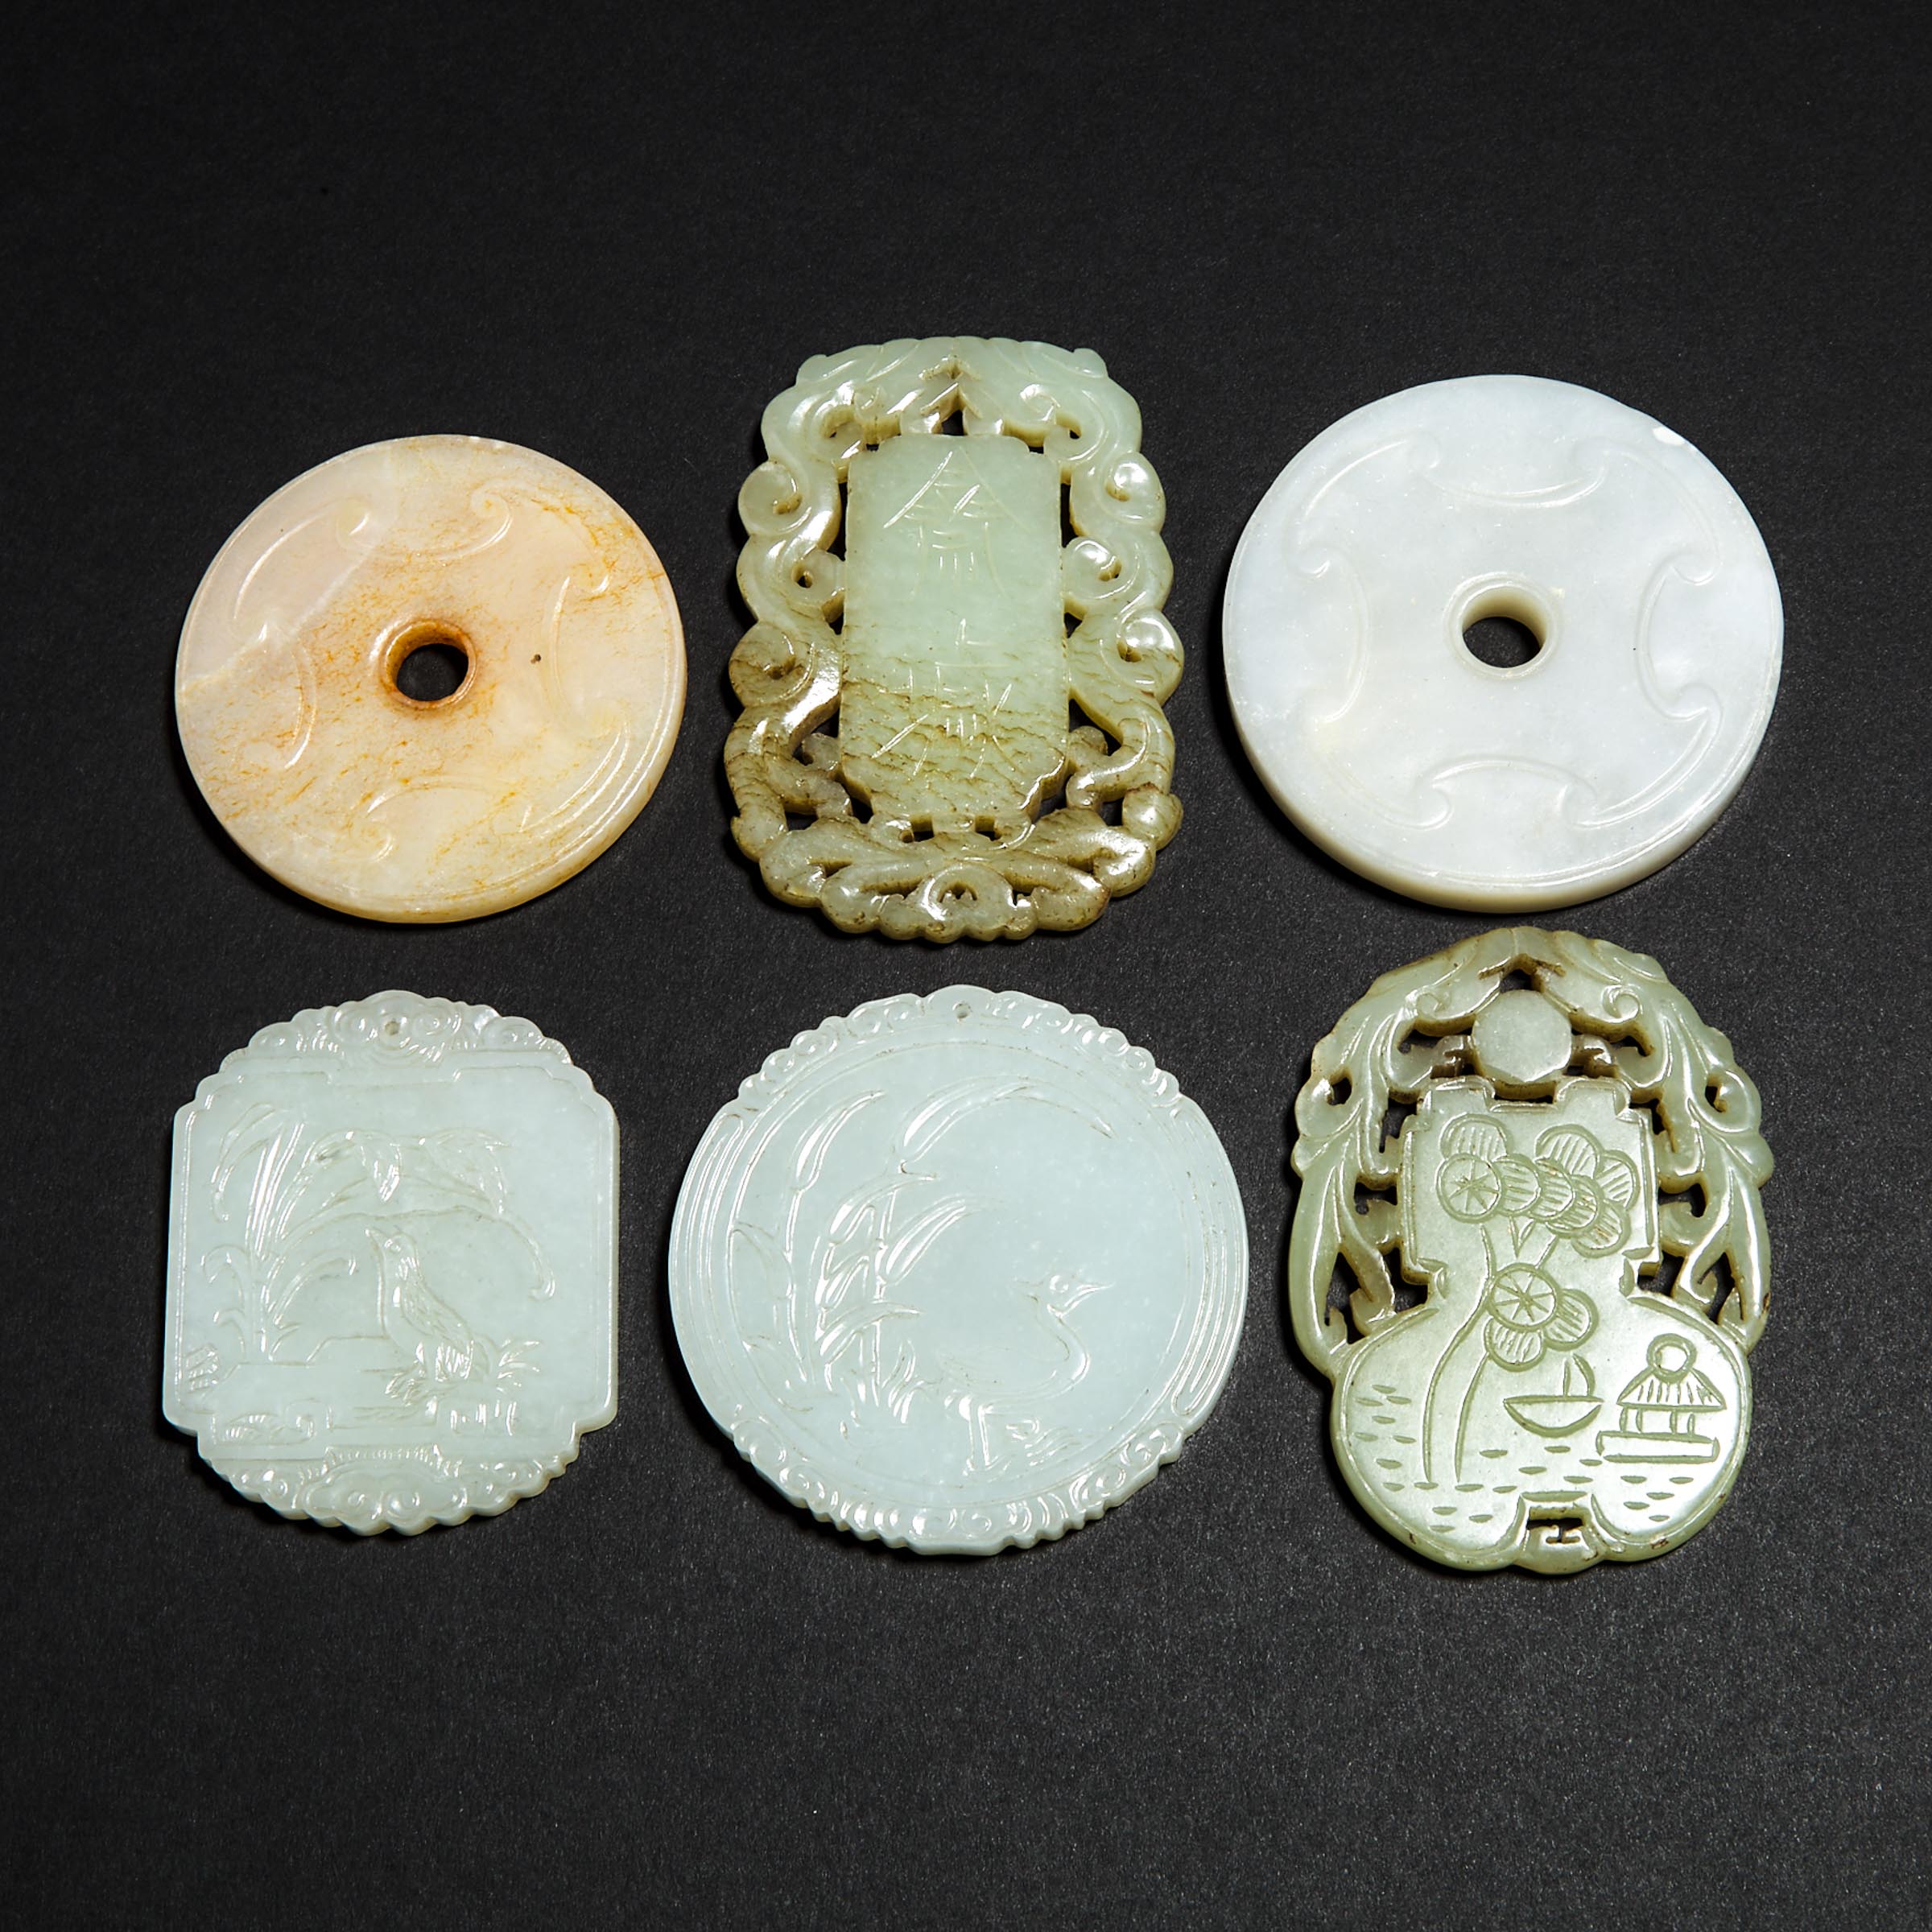 A Group of Six White and Celadon Jade Plaque Pendants